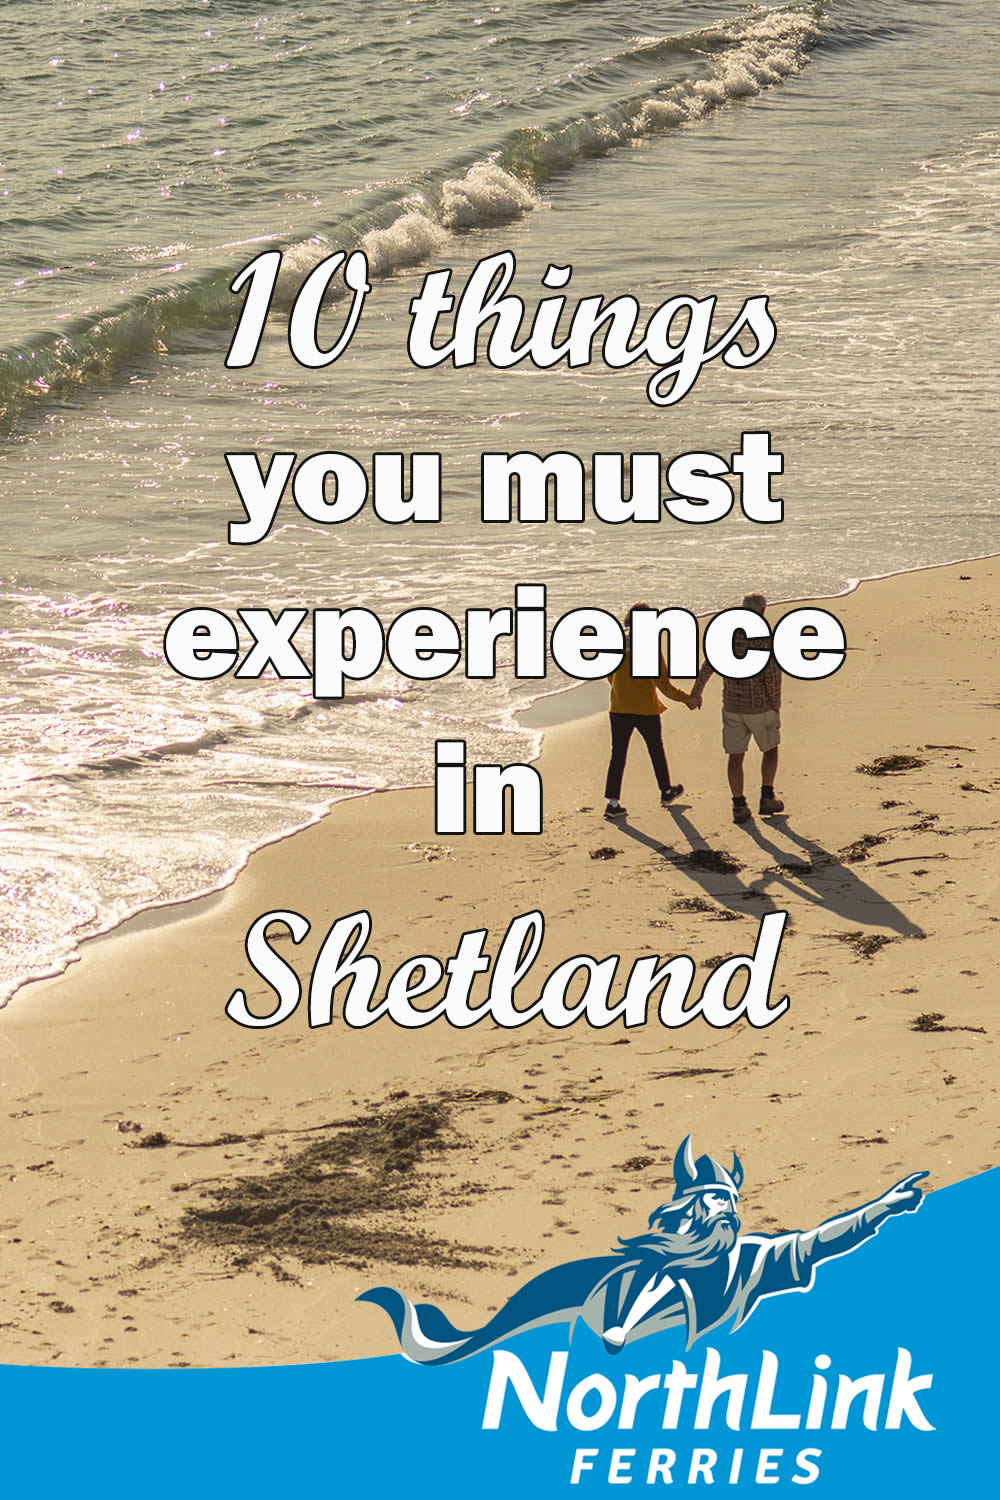 10 things you must experience in Shetland